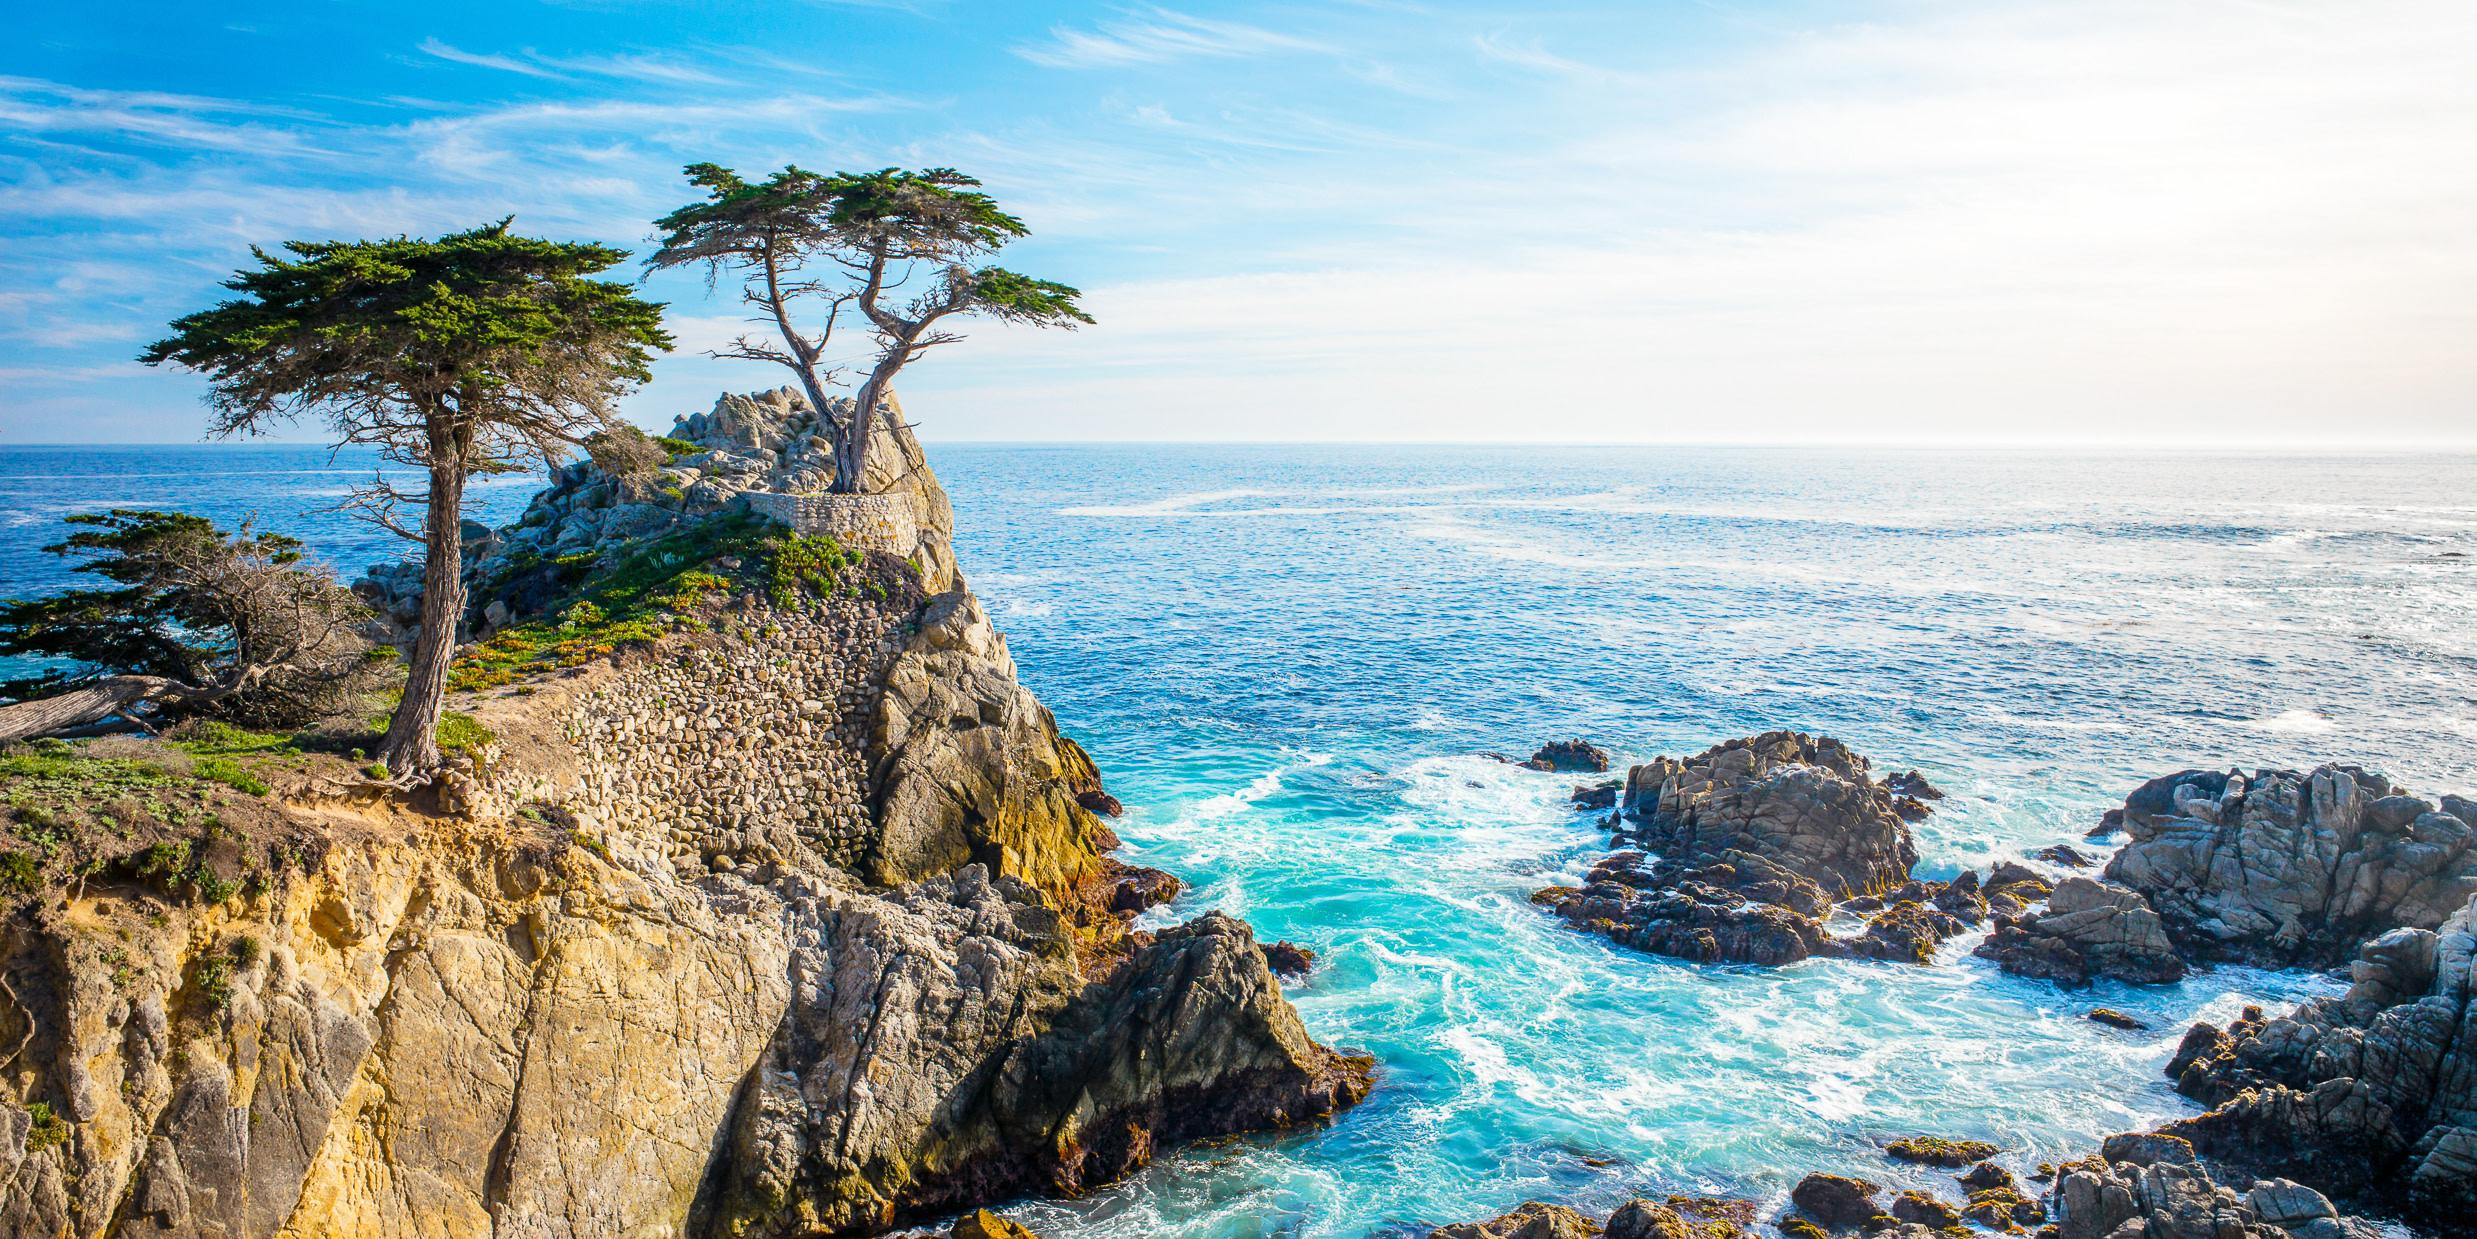 The Stars Attractions and Secret Sights of Monterey, California | Via